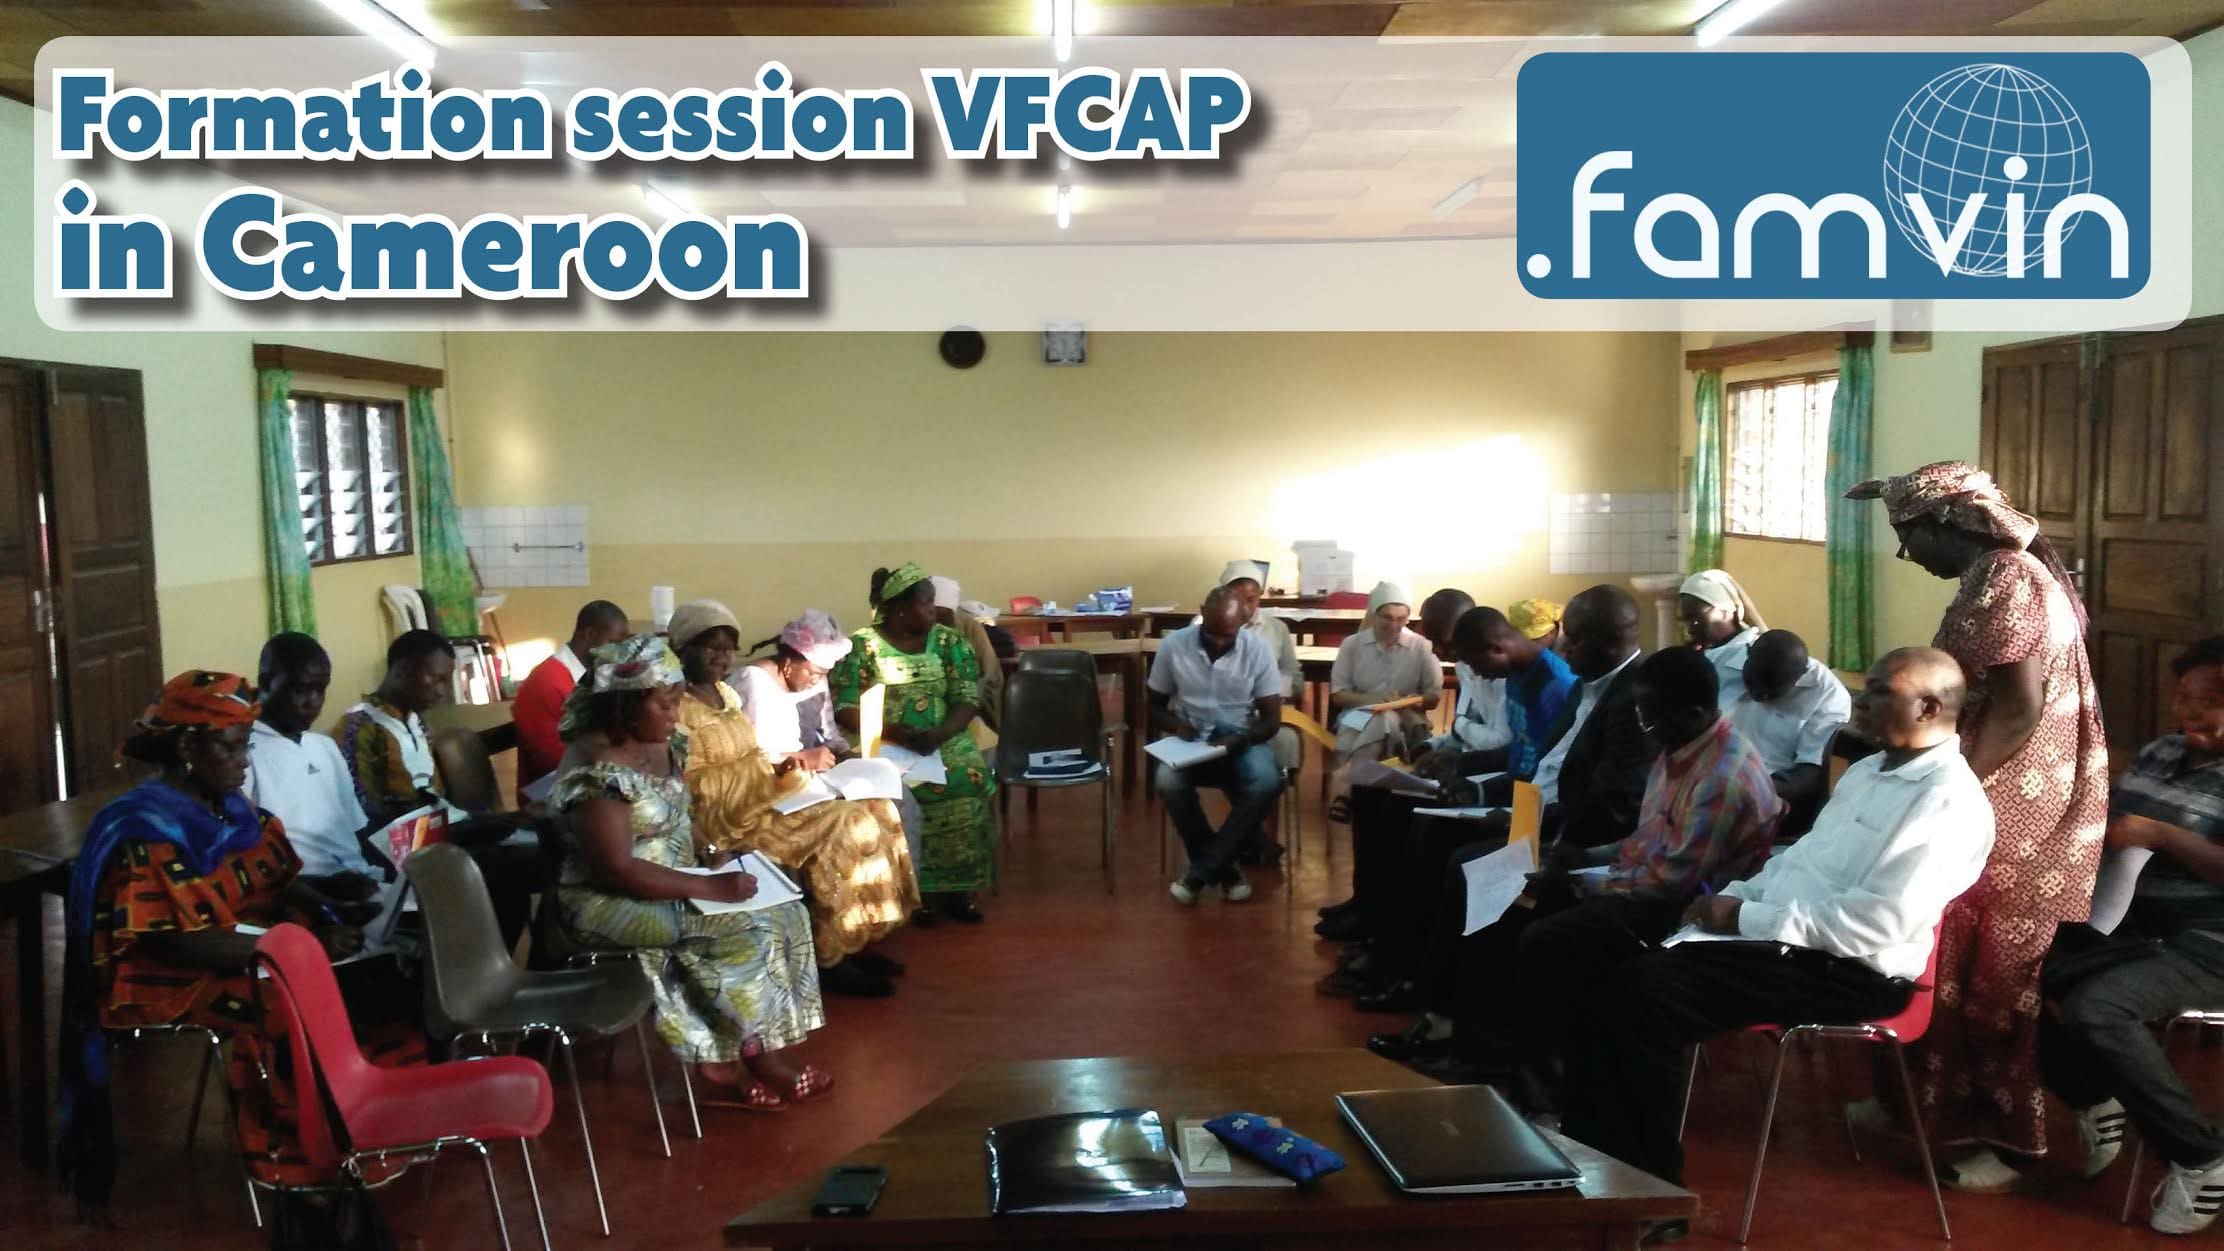 VFCAP CAMEROON – the first 3 days